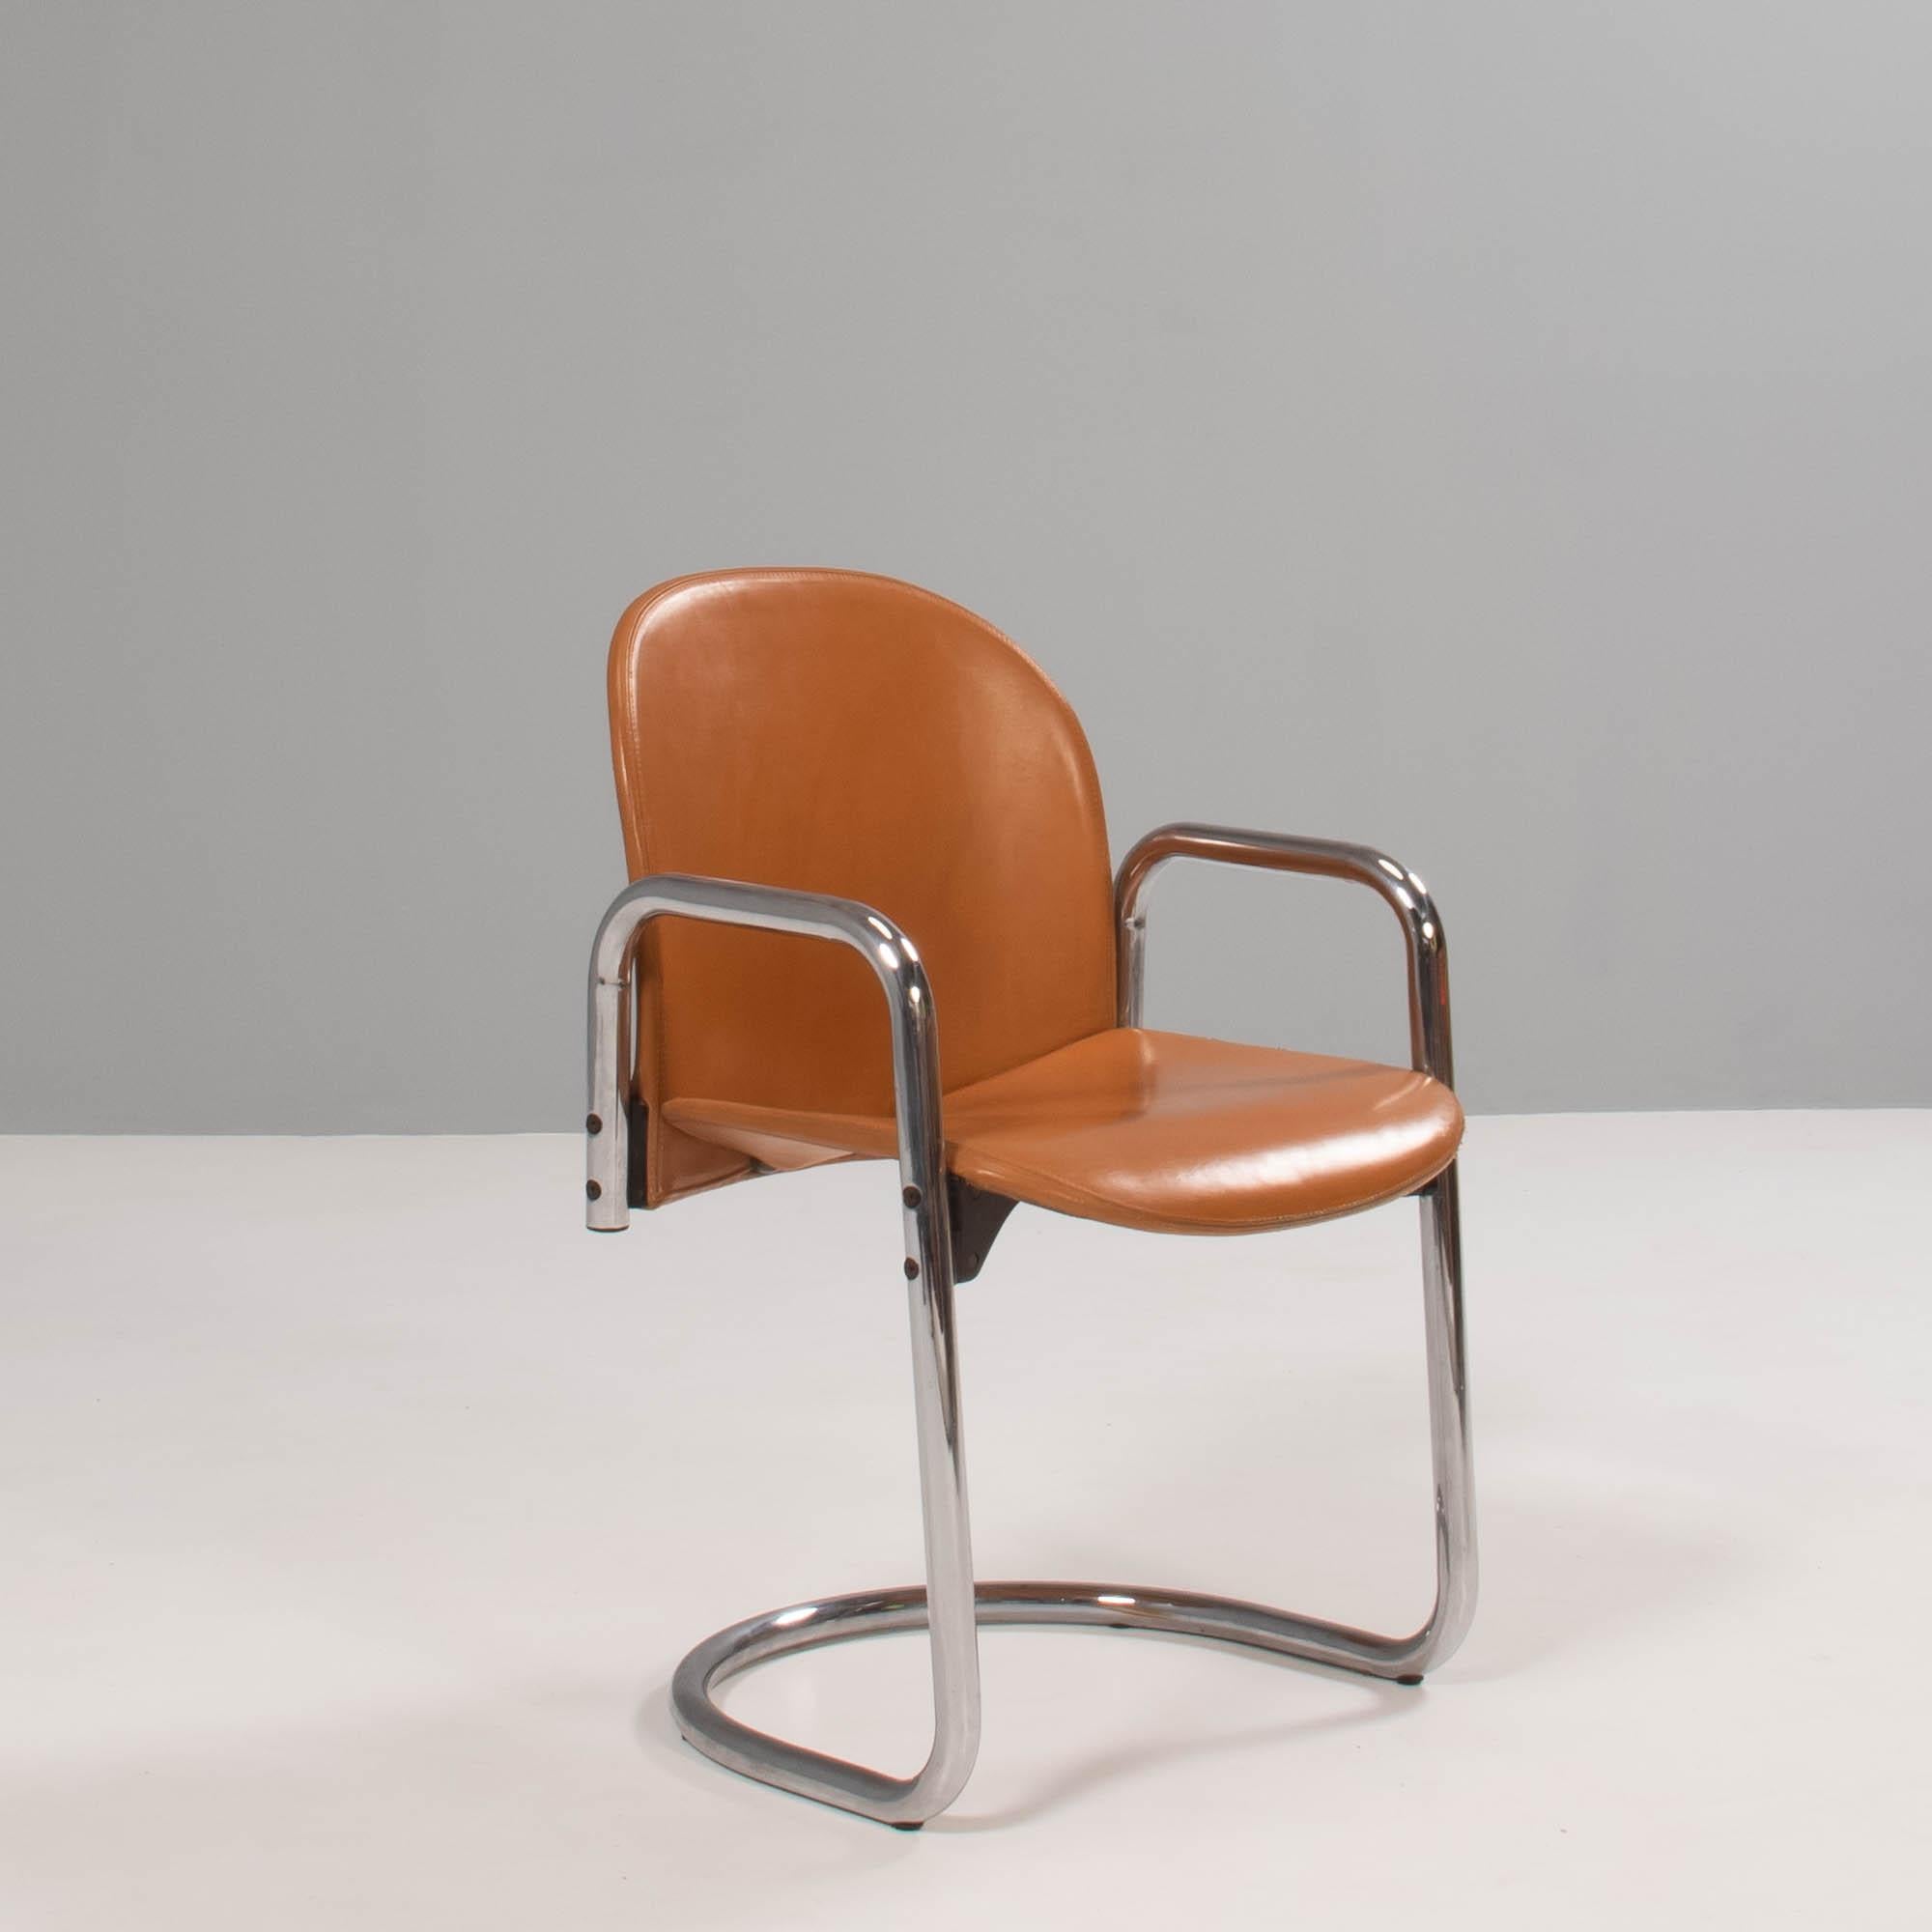 An incredible example of 1970s design, the Dialogo dining chairs was designed by Afra and Tobia Scarpa for B&B Italia in the 1970s.

The chair gives the illusion of being created from a single tubular chrome frame which forms the curved cantilever